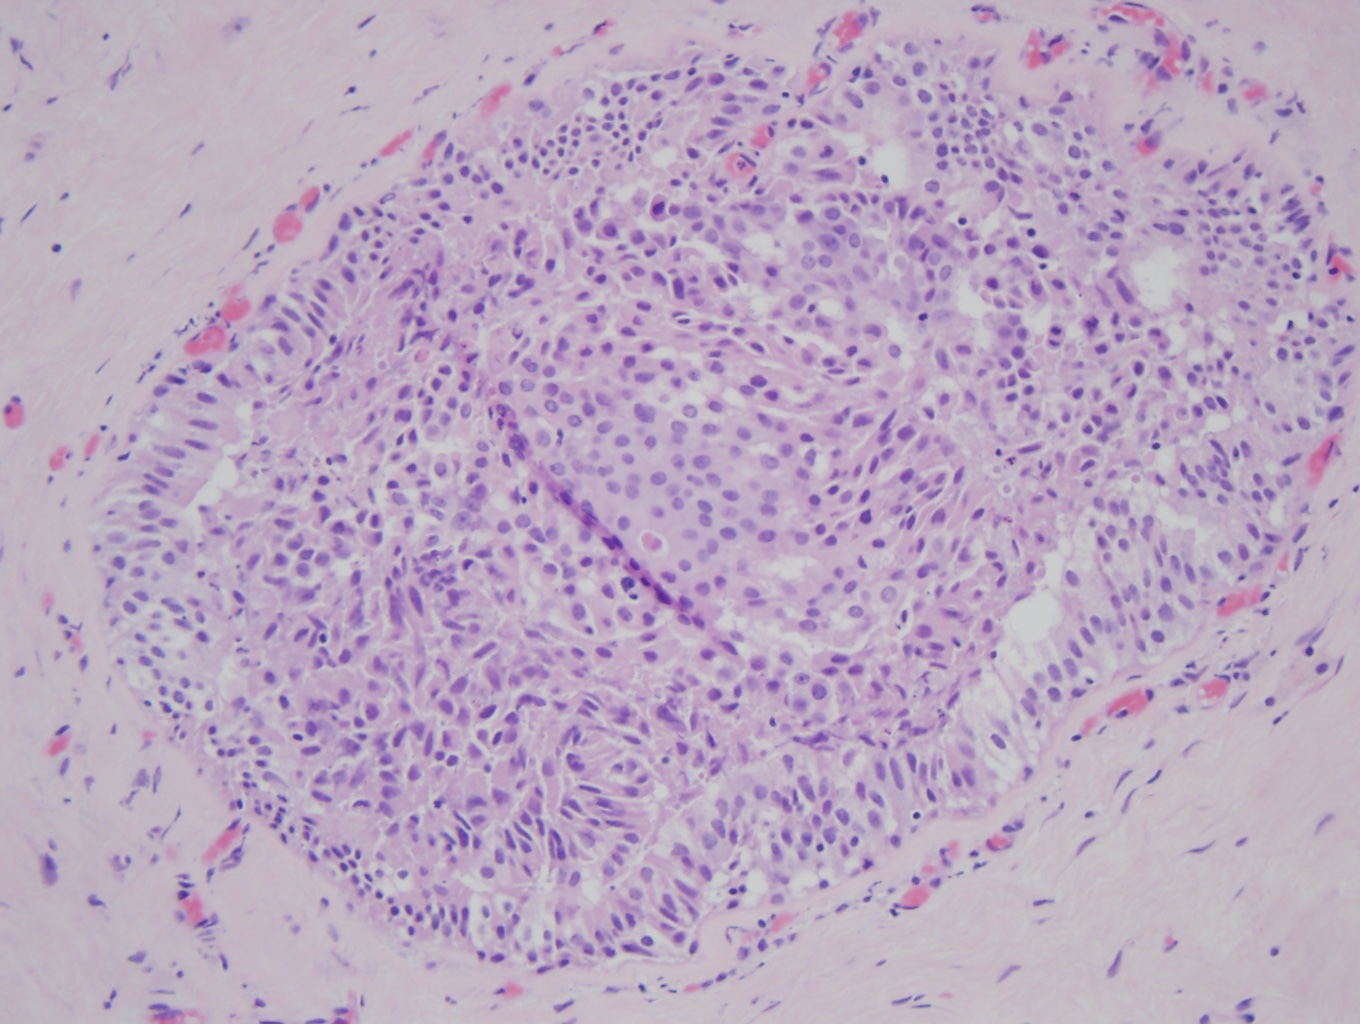 Atypical ductal hyperplasia (ADH) (x20). In the middle of the duct is a proliferation of organized atypical epithelial cells with round, monomorphic, and uniform nuclei, consistent with ADH.  The remainder of the duct is filled with a haphazard organization of epithelial cells with overlapping nuclei that are variable in shape and size, consistent with usual ductal hyperplasia (UDH), a benign epithelial cellular proliferation. 